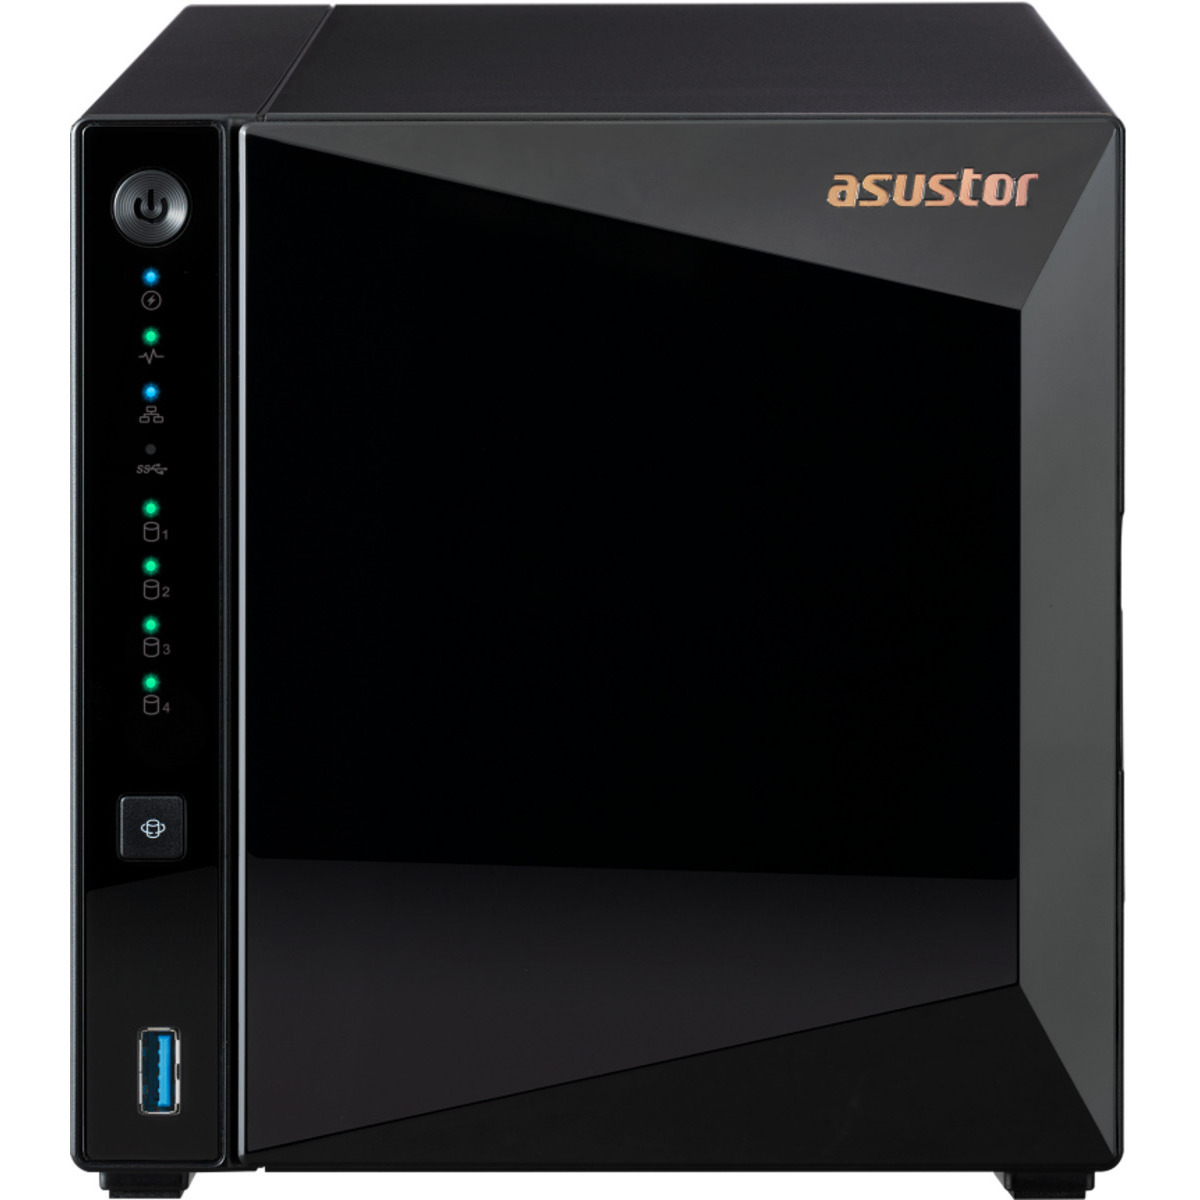 ASUSTOR DRIVESTOR 4 Pro Gen2 AS3304T v2 40tb 4-Bay Desktop Personal / Basic Home / Small Office NAS - Network Attached Storage Device 4x10tb Western Digital Red Pro WD102KFBX 3.5 7200rpm SATA 6Gb/s HDD NAS Class Drives Installed - Burn-In Tested - ON SALE DRIVESTOR 4 Pro Gen2 AS3304T v2